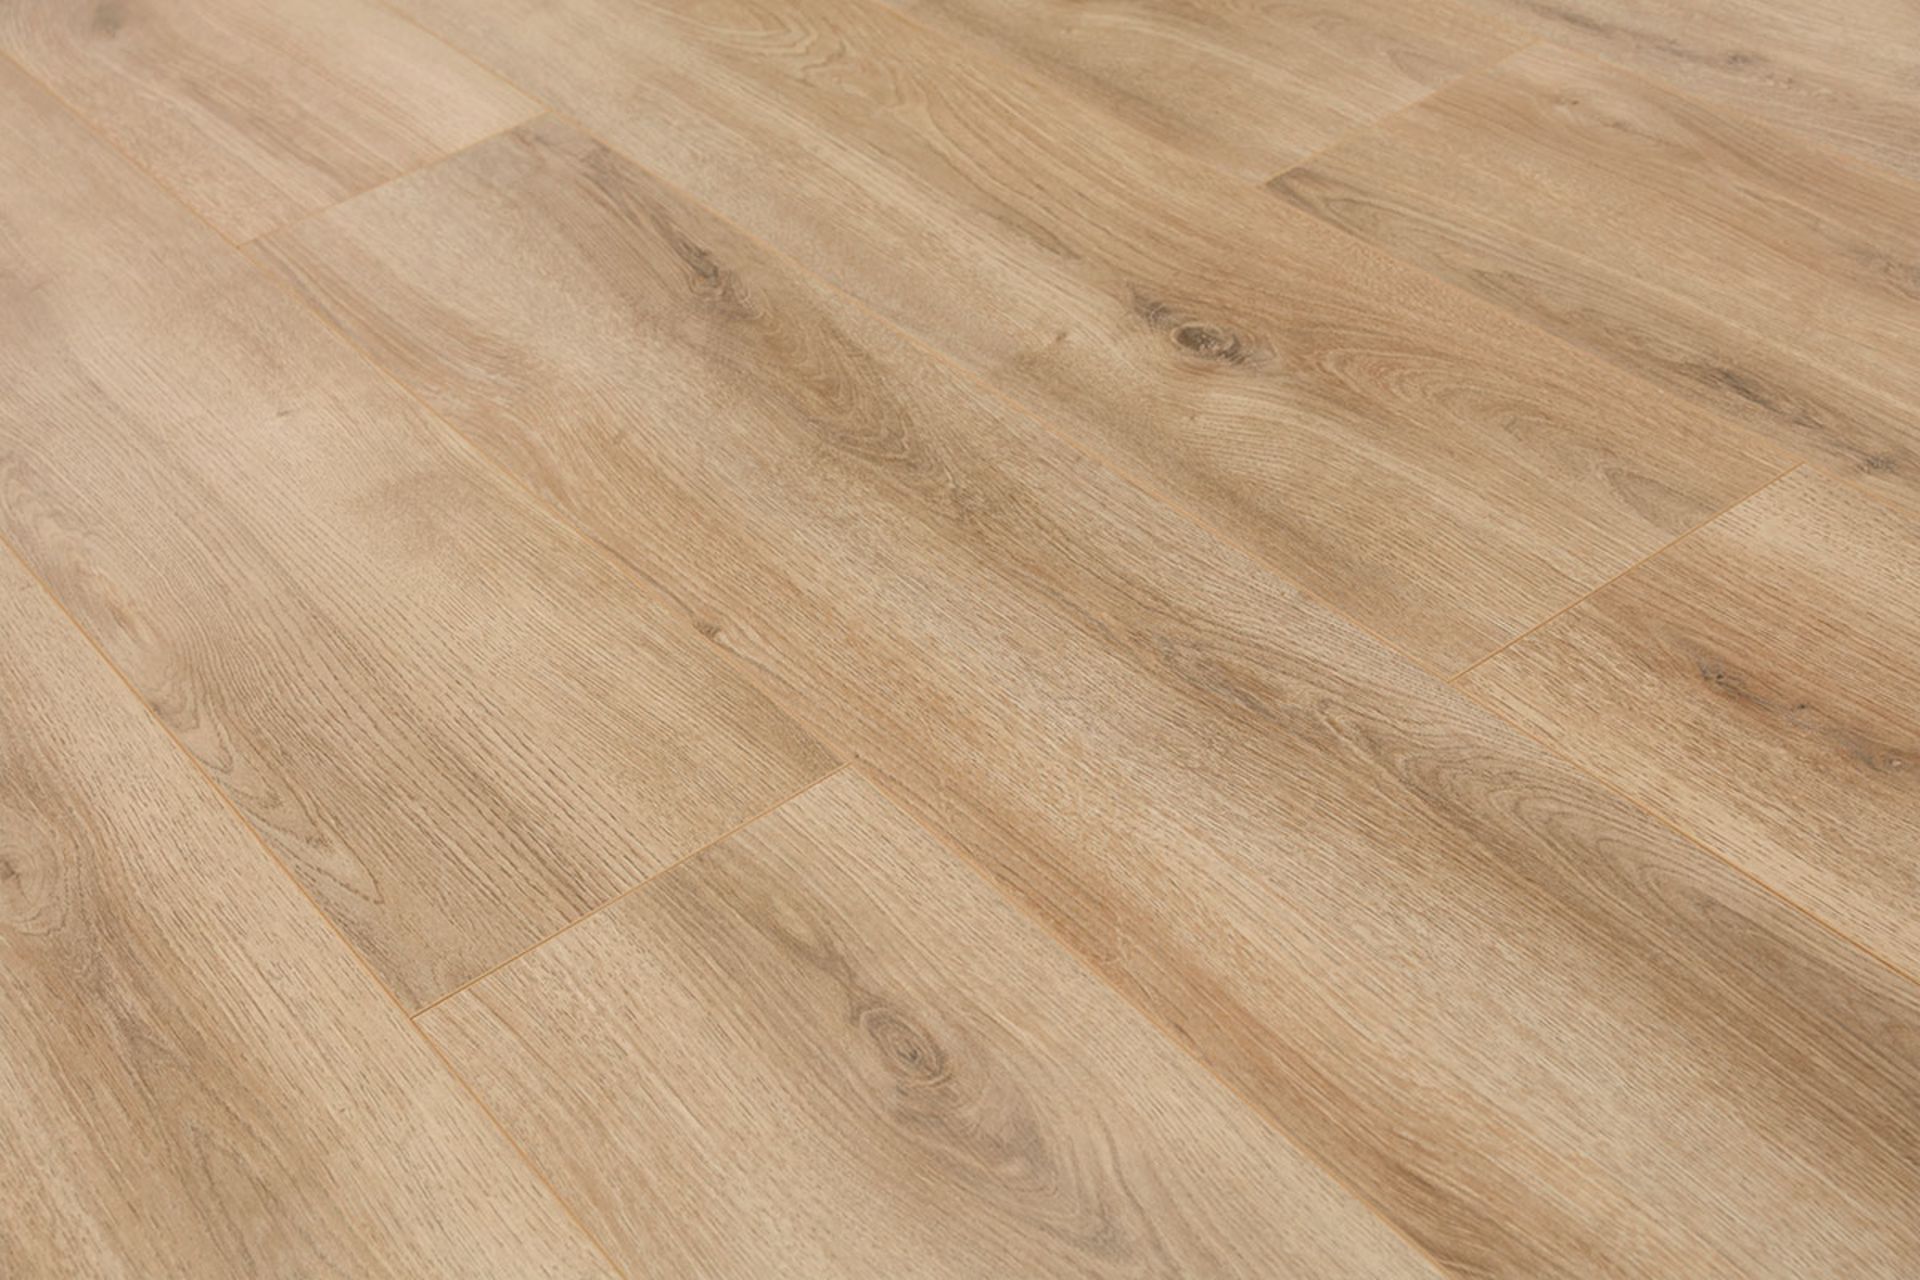 14.34m2 LAMINATE FLOORING SUMMER NATURAL OAK. With a warming natural oak tone, this floor is pe... - Image 2 of 2